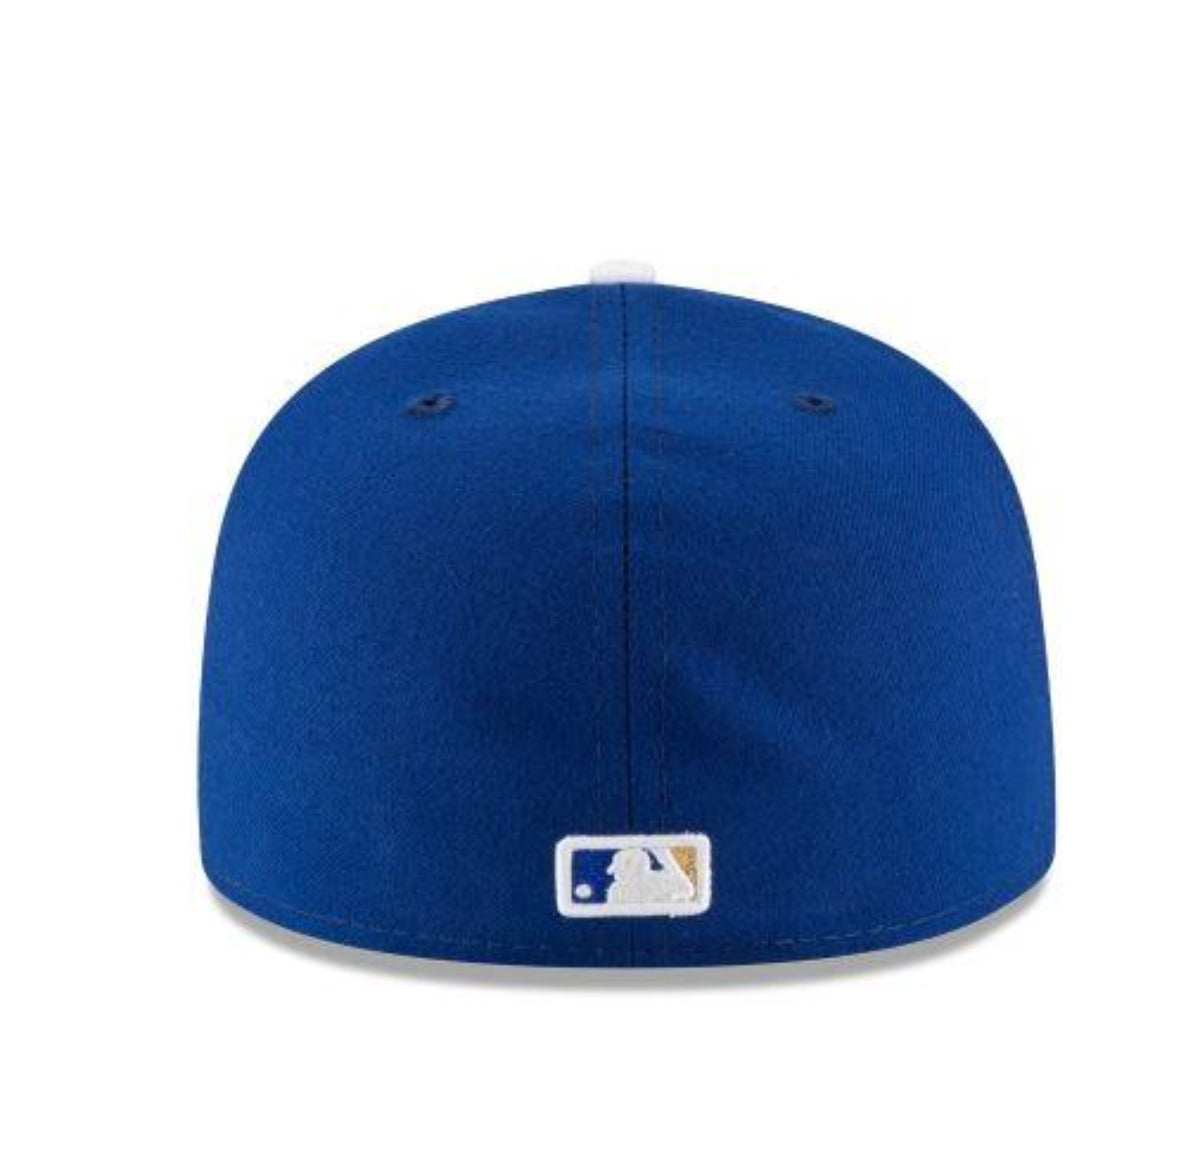 KANSAS CITY ROYALS  NEW ERA HOME  AUTHENTIC COLLECTION 59FIFTY FITTED-ON-FIELD COLLECTION-ROYAL